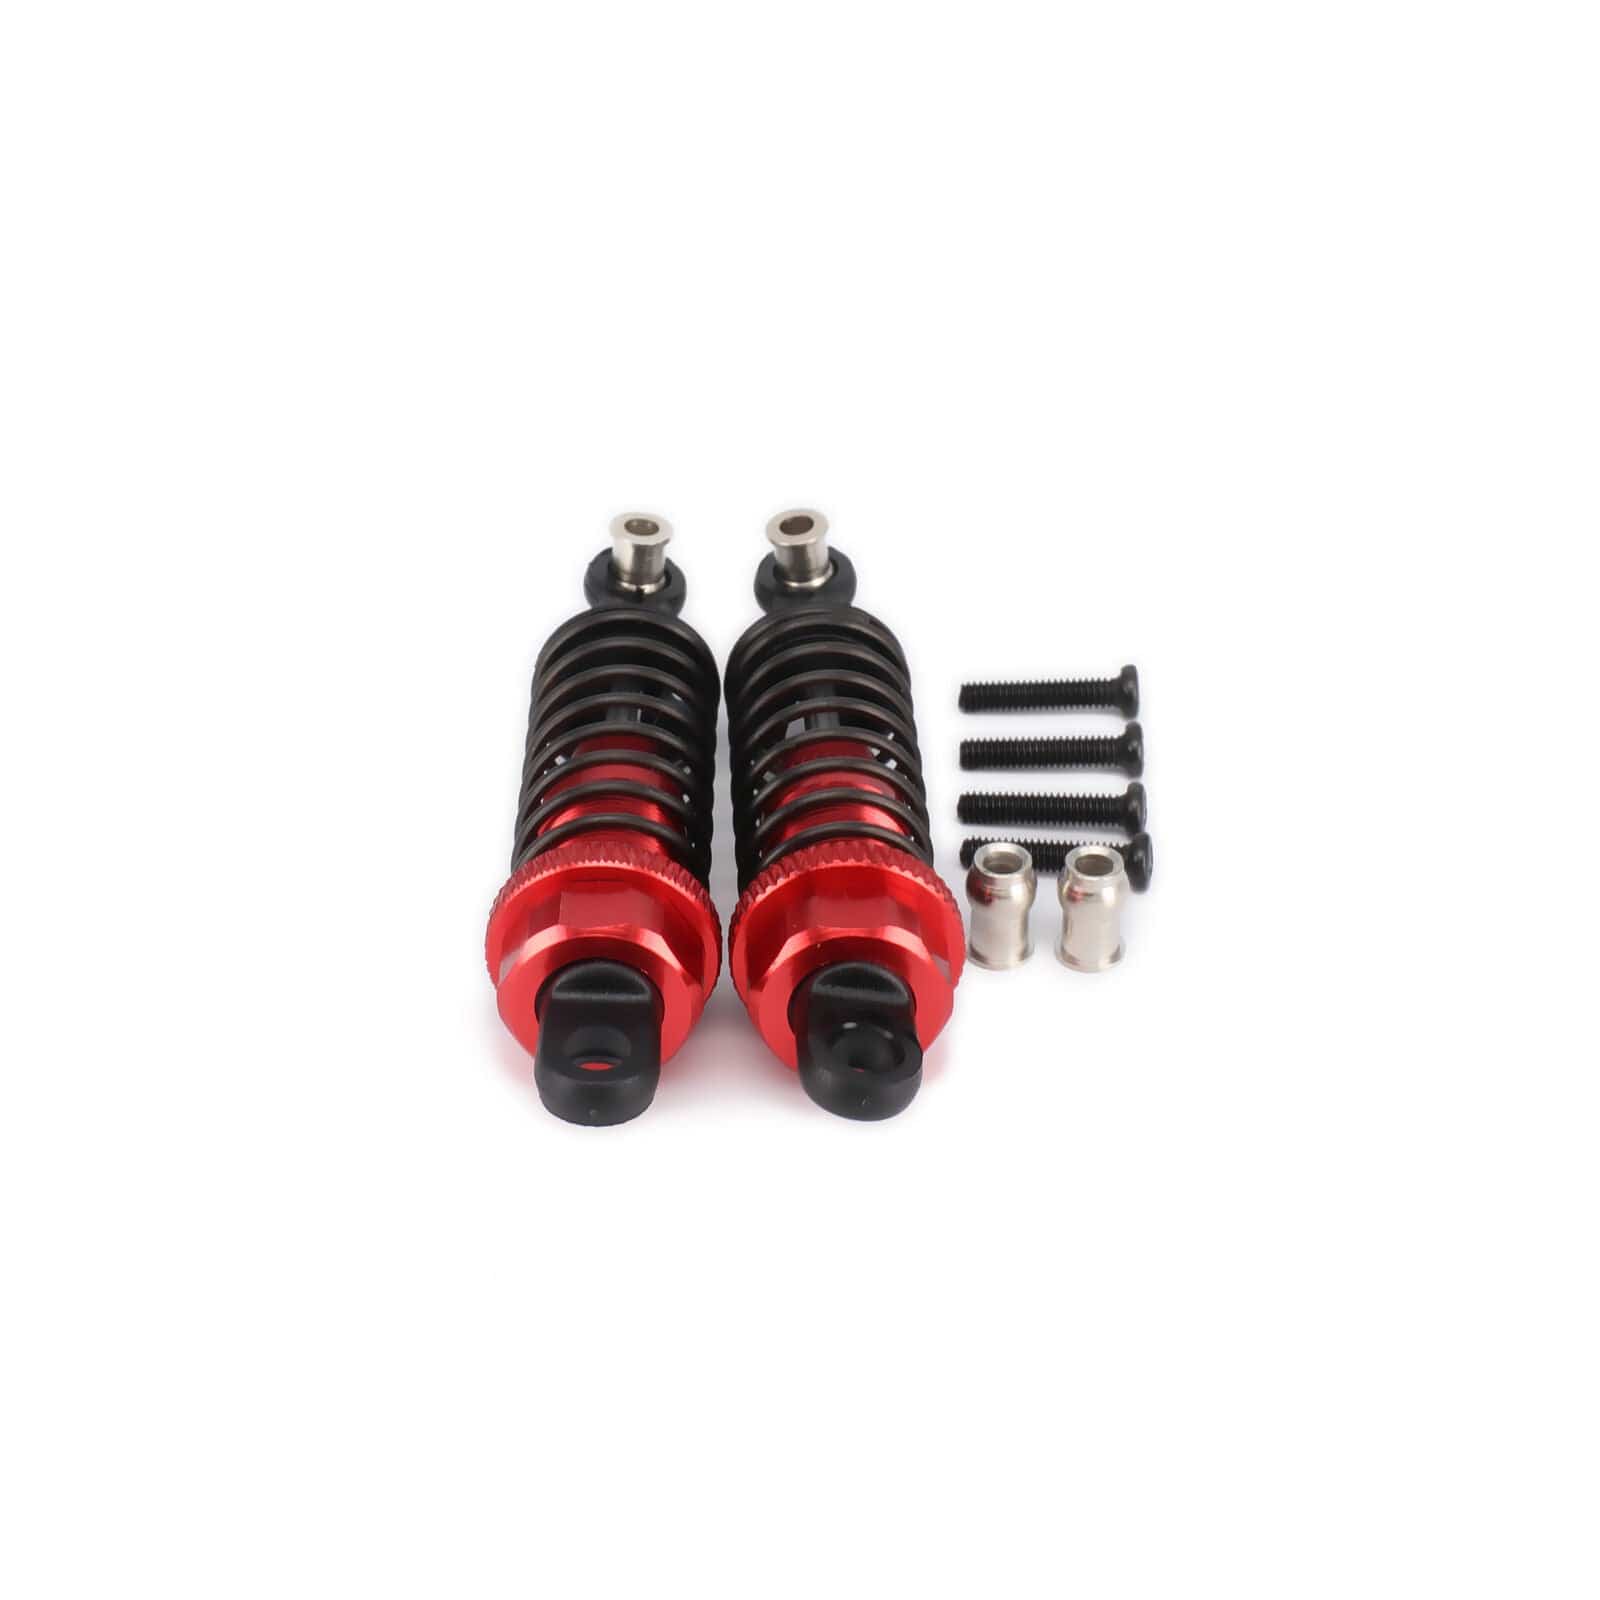 RCAWD WLTOYS UPGRADE PARTS RCAWD RC Shock Absorber CA580018 For RC Car 1:18 WLtoys A949 A959 A969 Buggy 4PCS